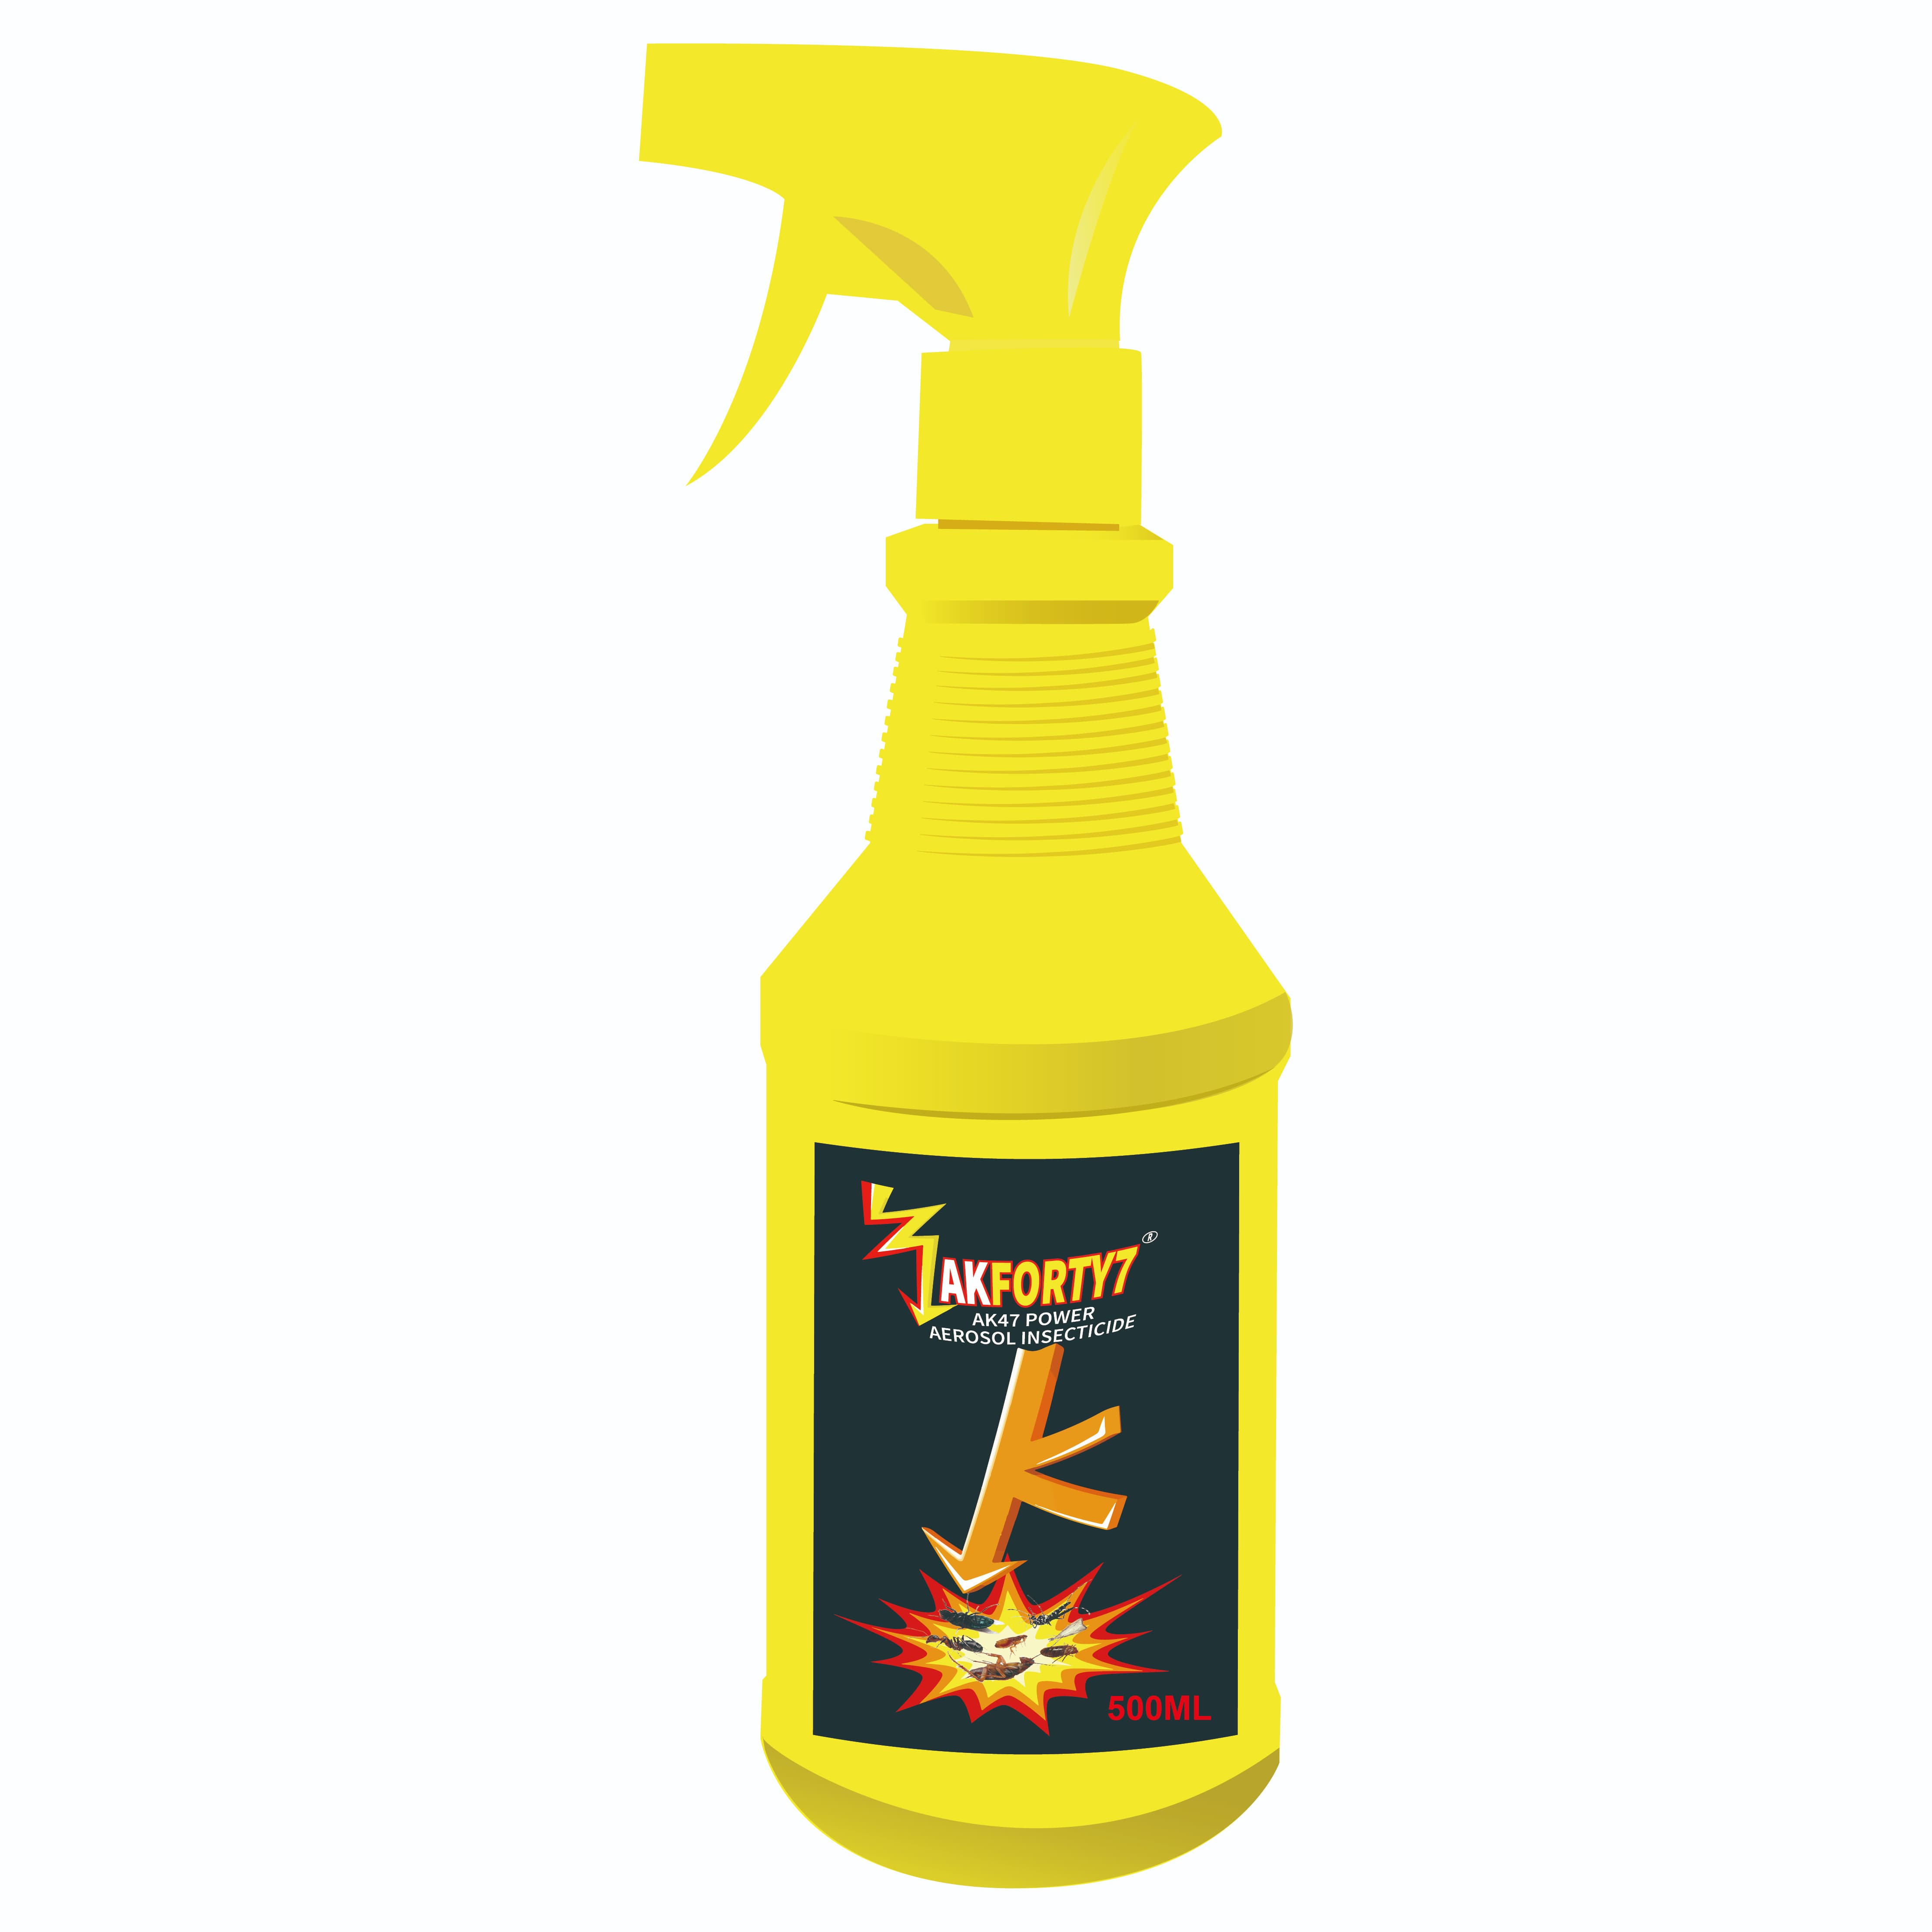 500ml yellow ak47 Insecticide liquid